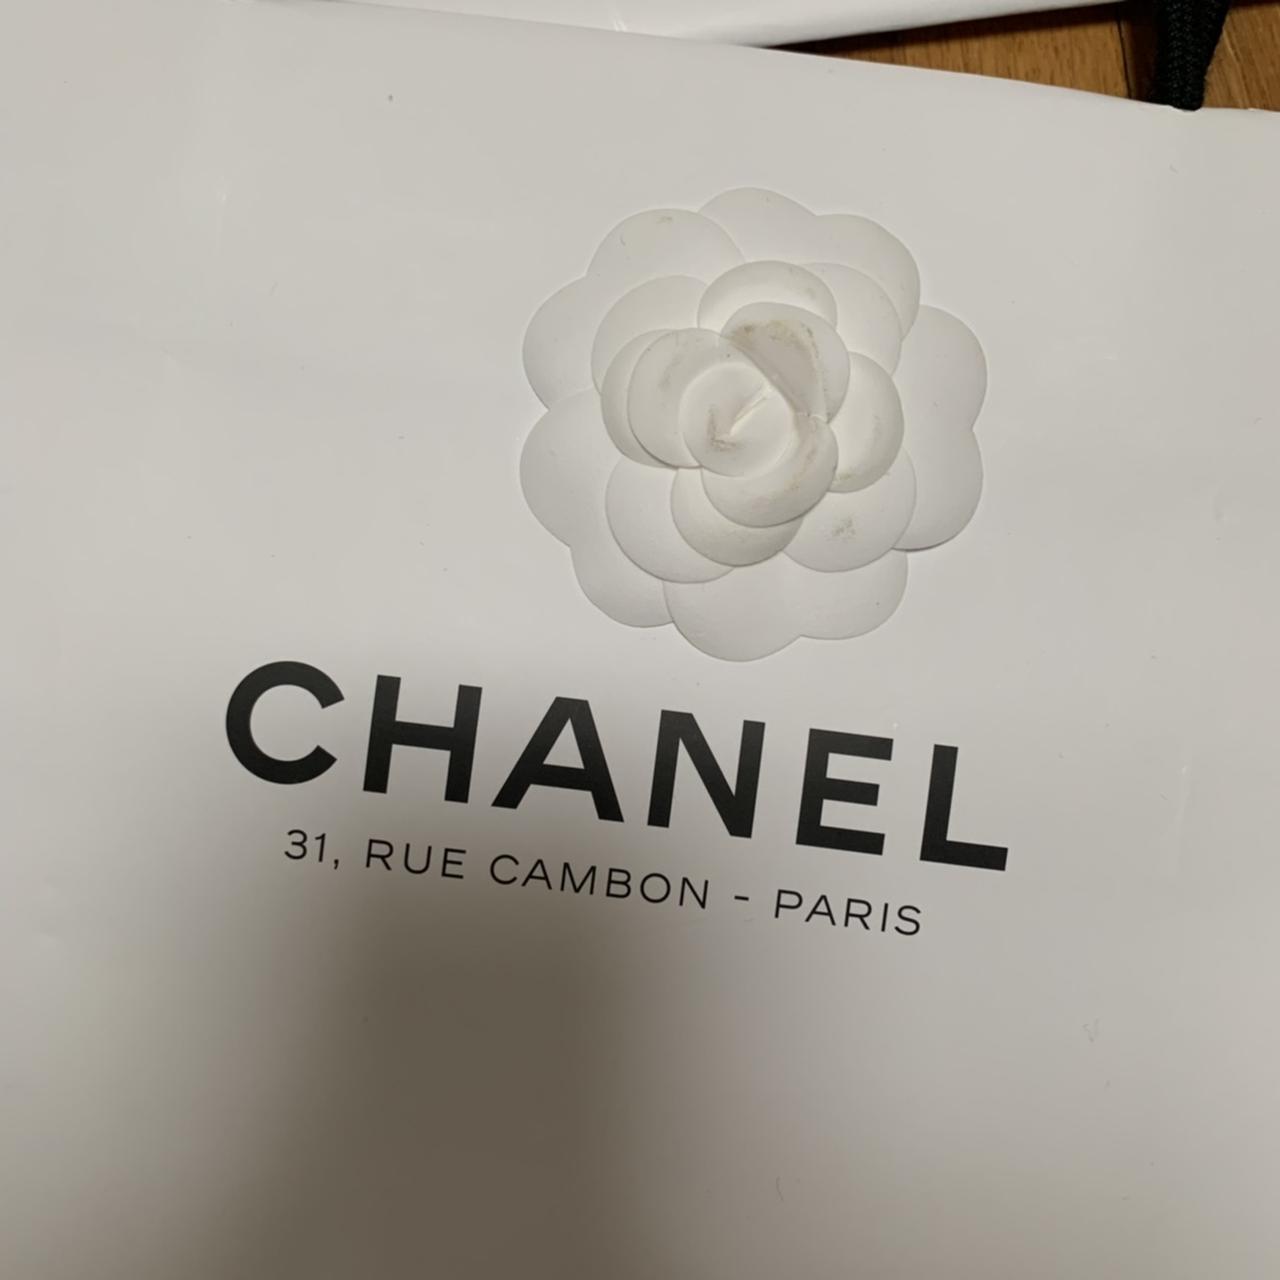 authentic chanel white paper bag with one of the - Depop